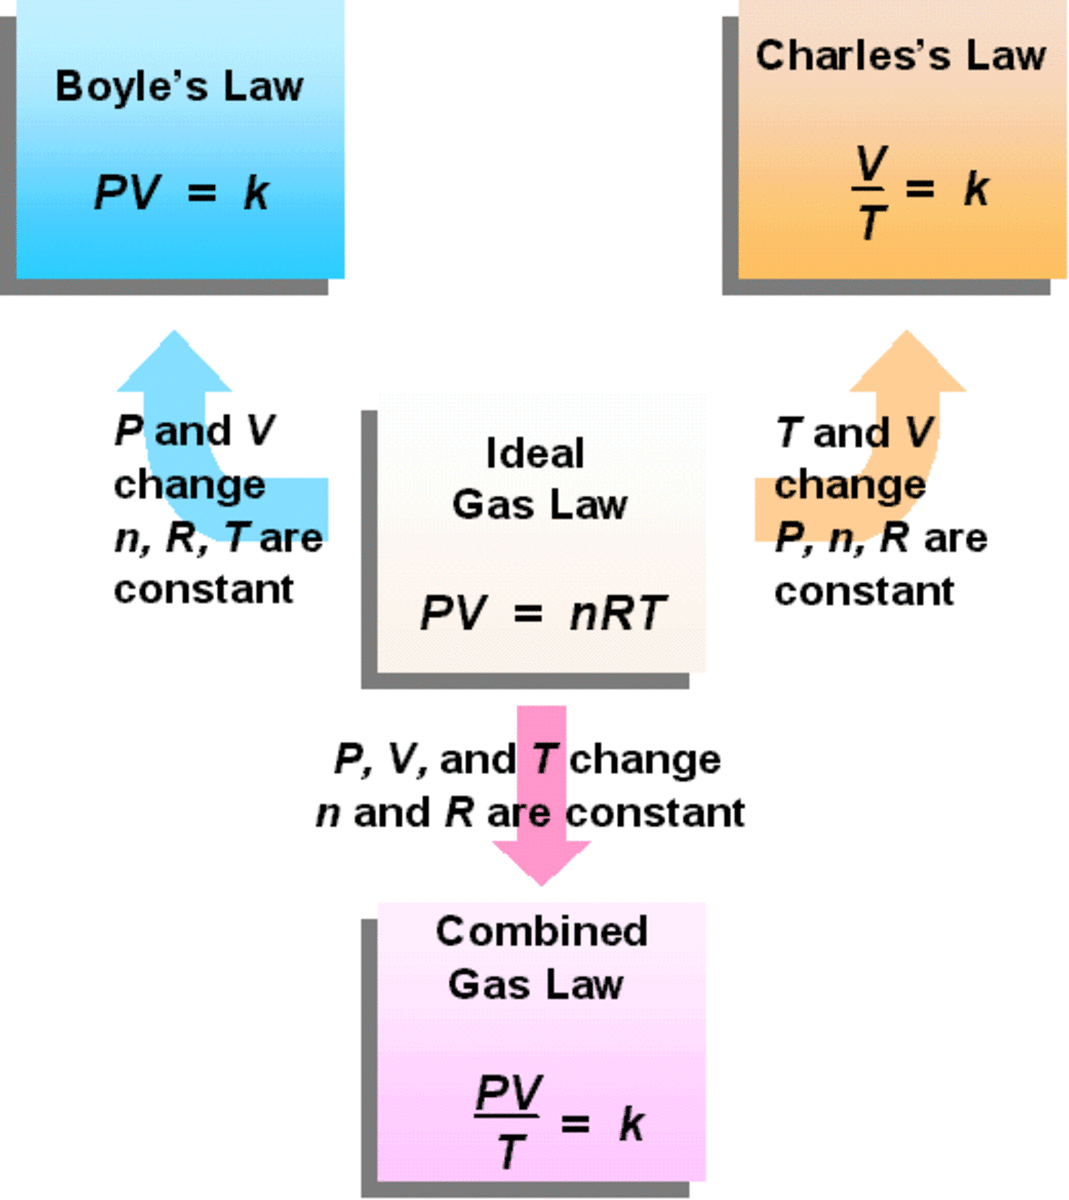 The Combined Gas Law (Combination of Boyle’s Law and Charle’s Law) states that the volume of a certain mass of gas is inversely proportional to its pressure and directly proportional to its absolute temperature.